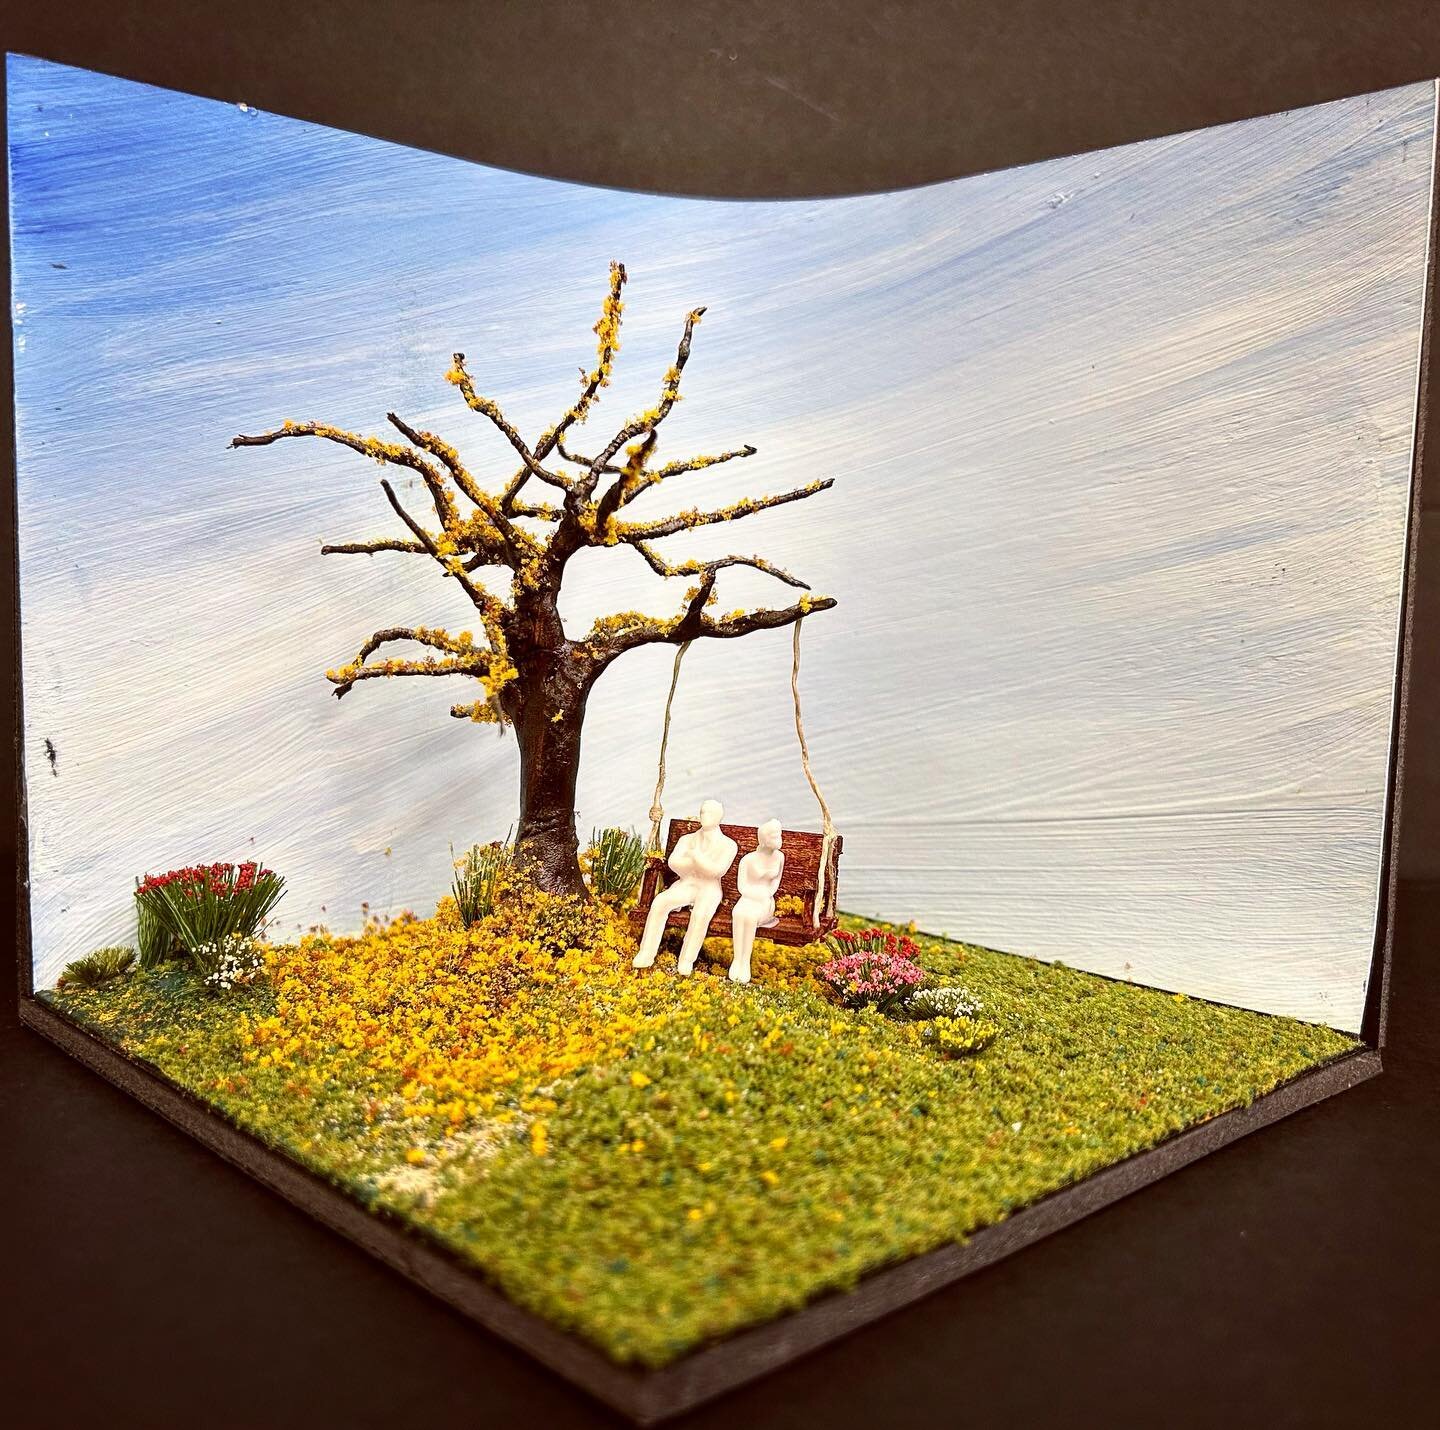 So happy that fall is officially here! Realistic tree model from class a couple weeks ago. #scenicmodel #scenedesign #scenicdesign #scenicdesigner #modelmaking #modelcraft